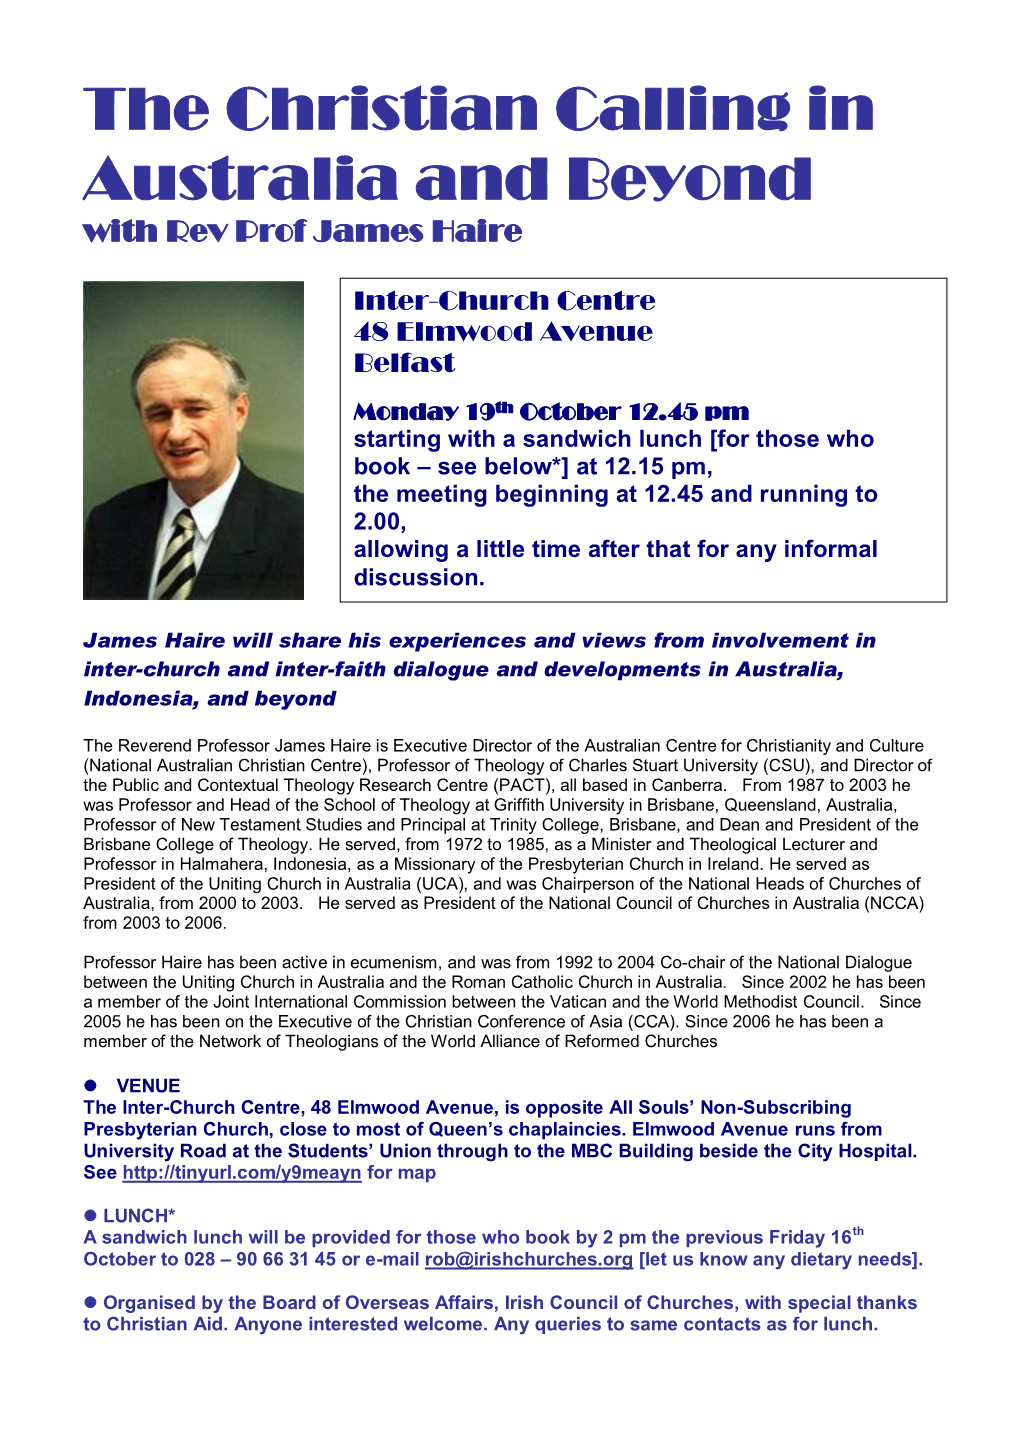 The Christian Calling in Australia and Beyond with Rev Prof James Haire